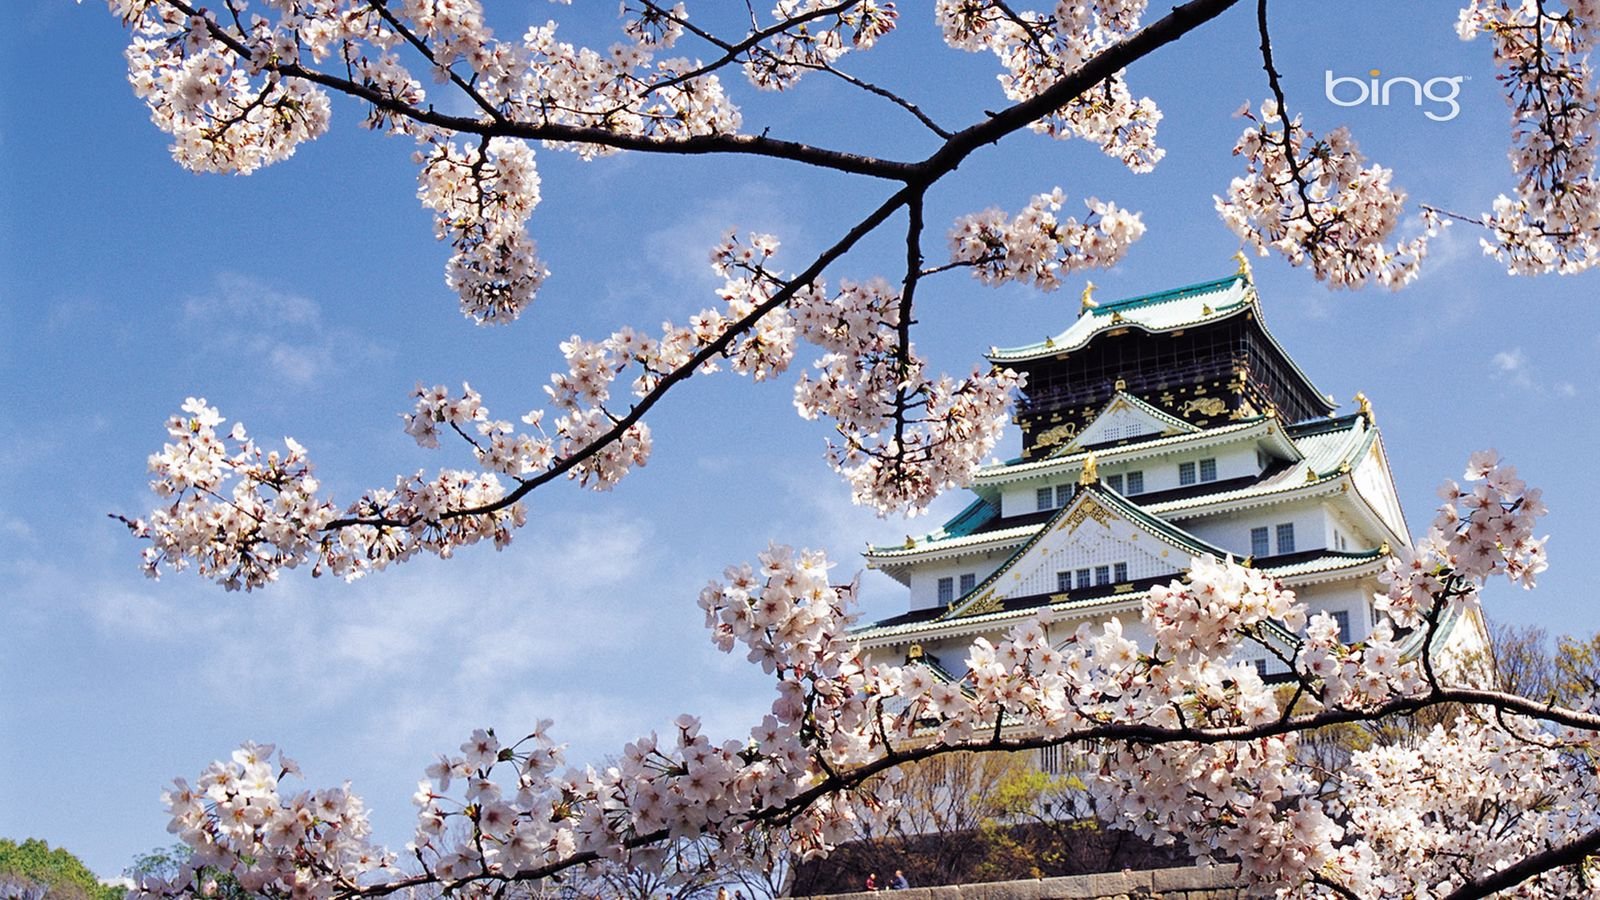 Download wallpaper 1600x900 spring, cherry, blossom, palace, japan, architecture widescreen 16:9 HD background